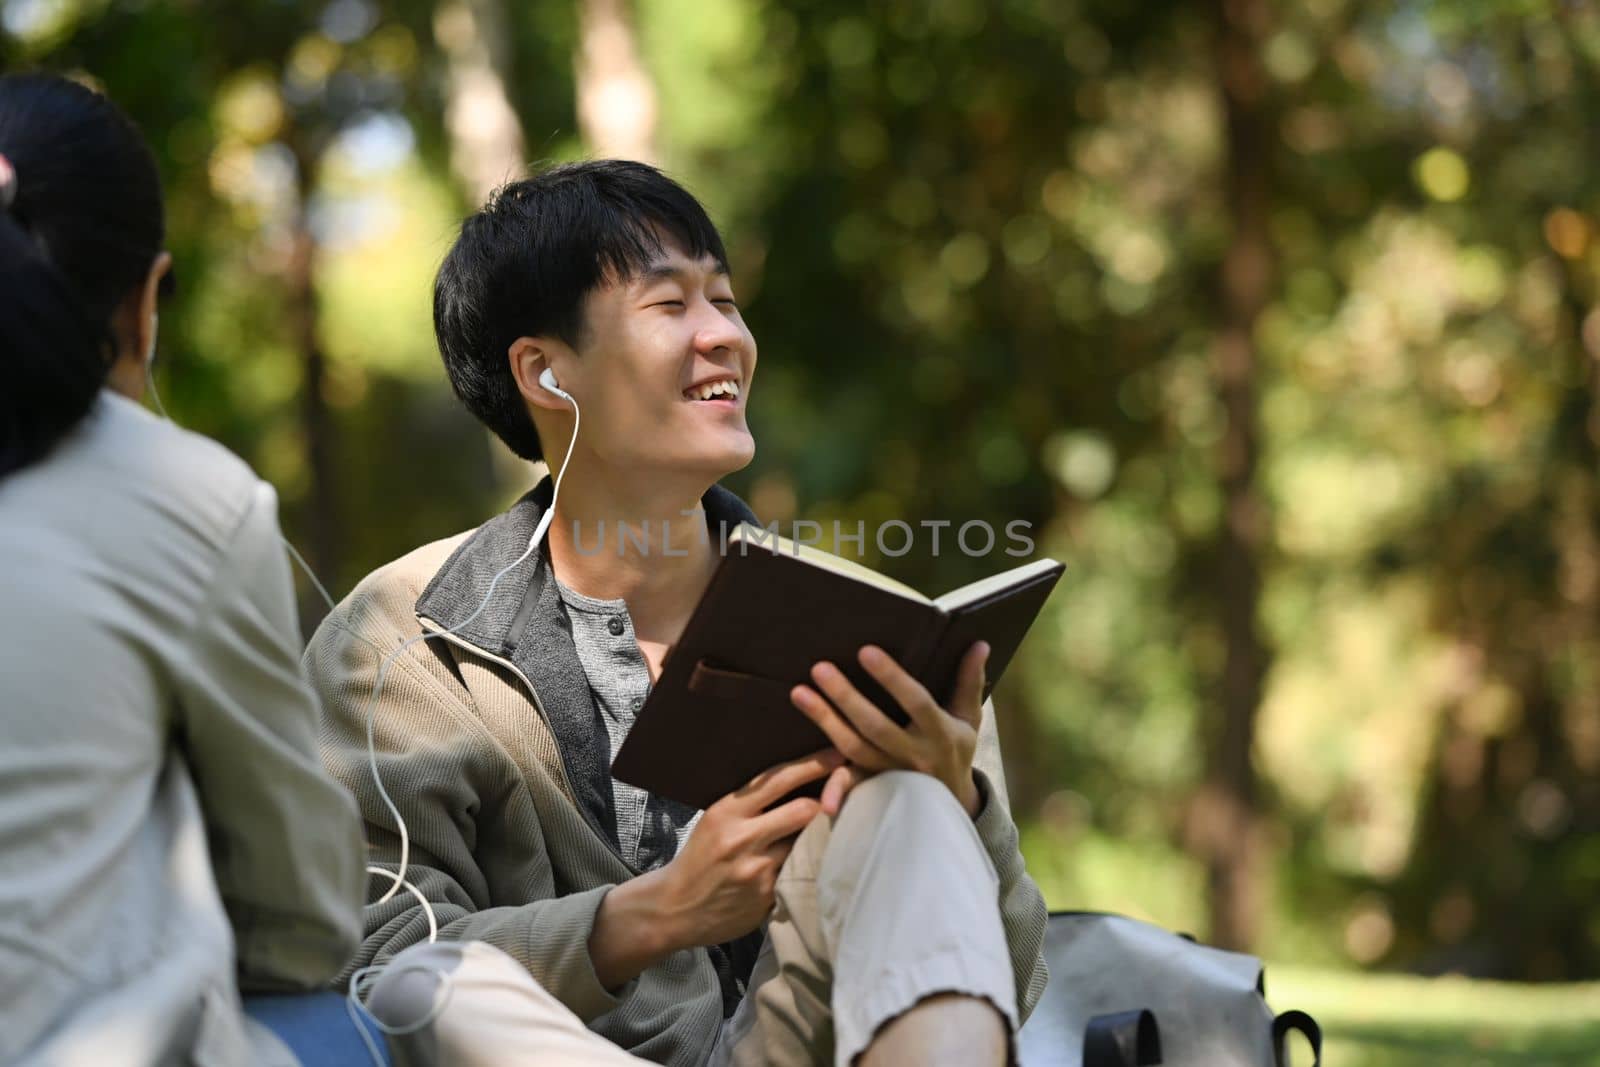 Lovely young couple sitting together in the park and listening to music with earphones.